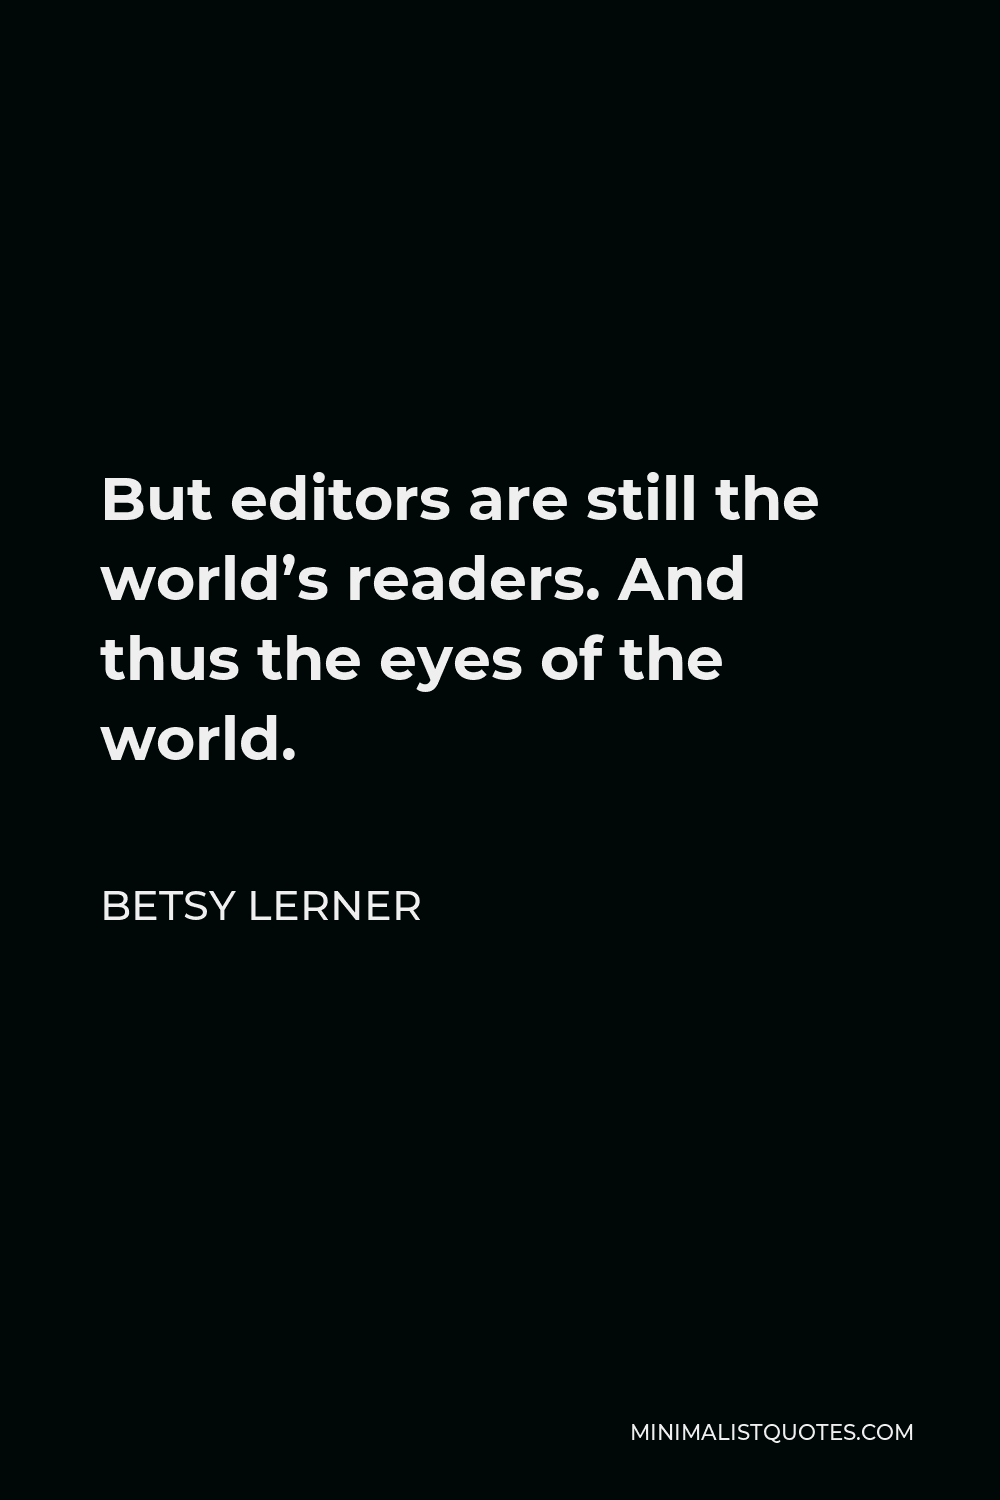 Betsy Lerner Quote - But editors are still the world’s readers. And thus the eyes of the world.